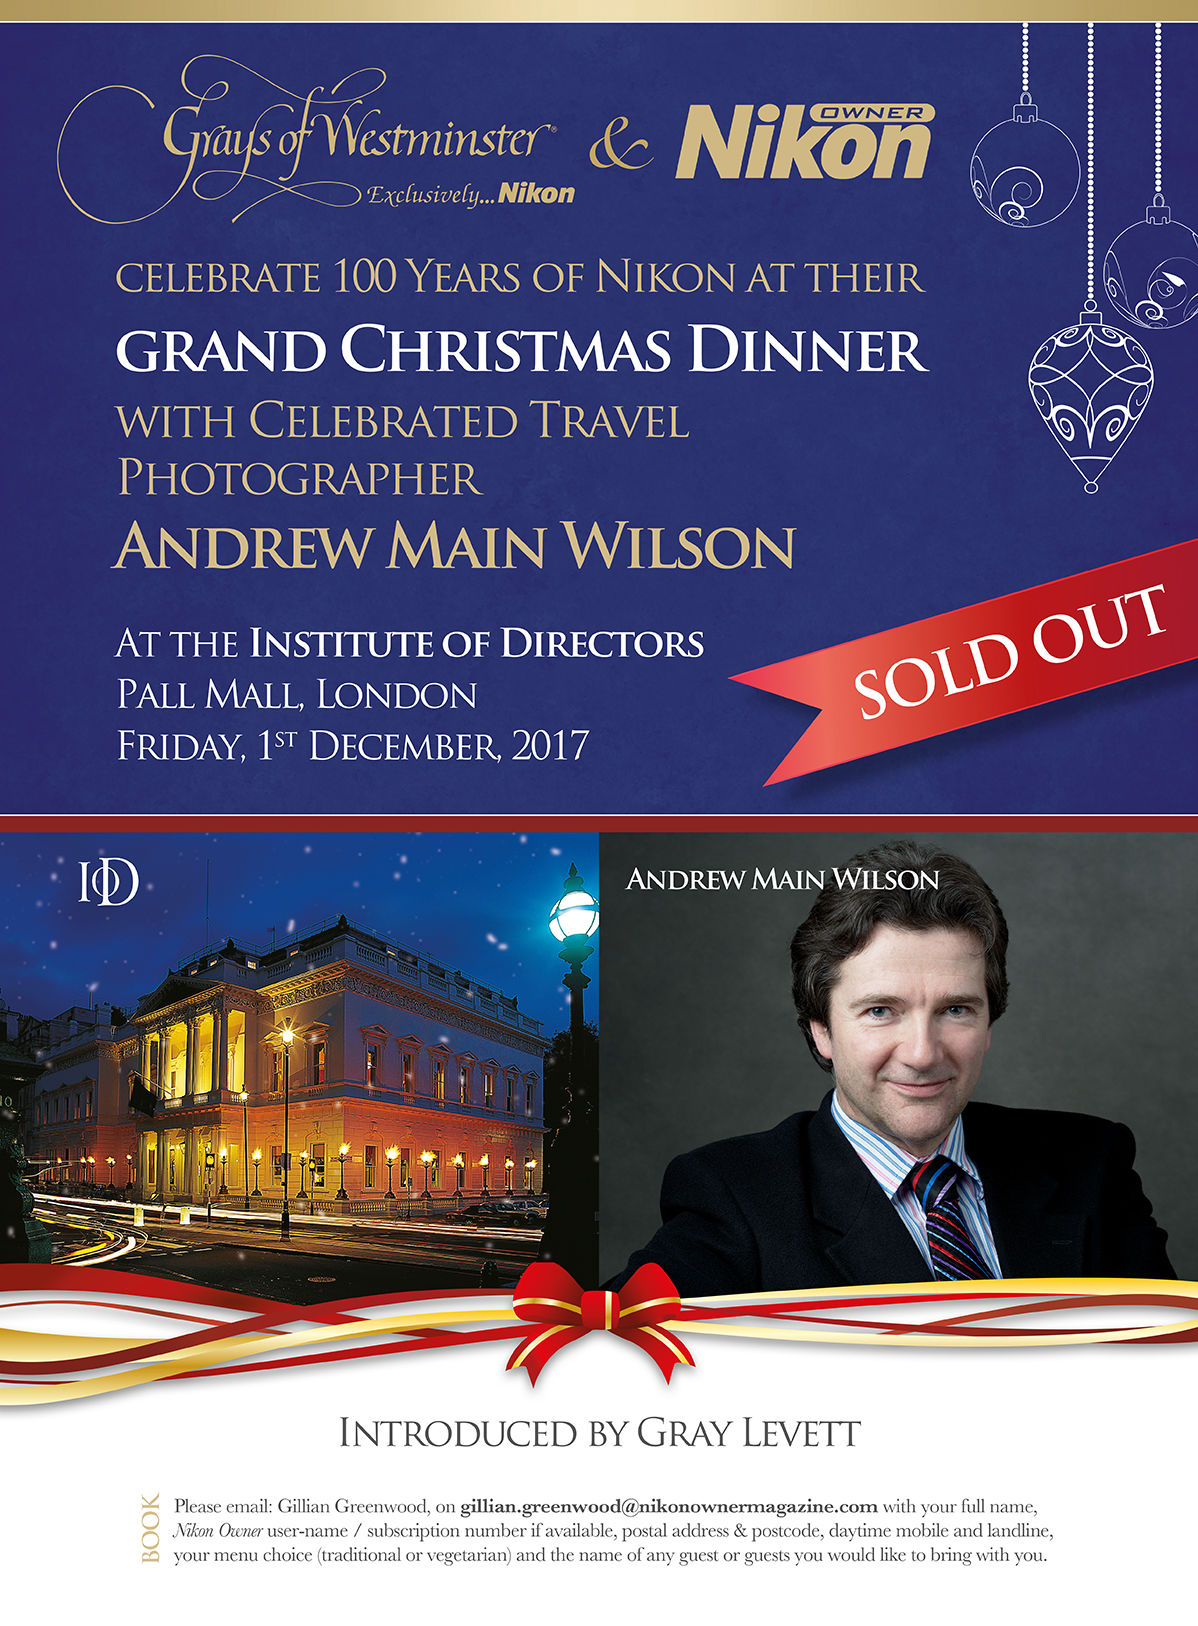 Grand Christmas Dinner with Celebrated Travel Photographer Andrew Main Wilson